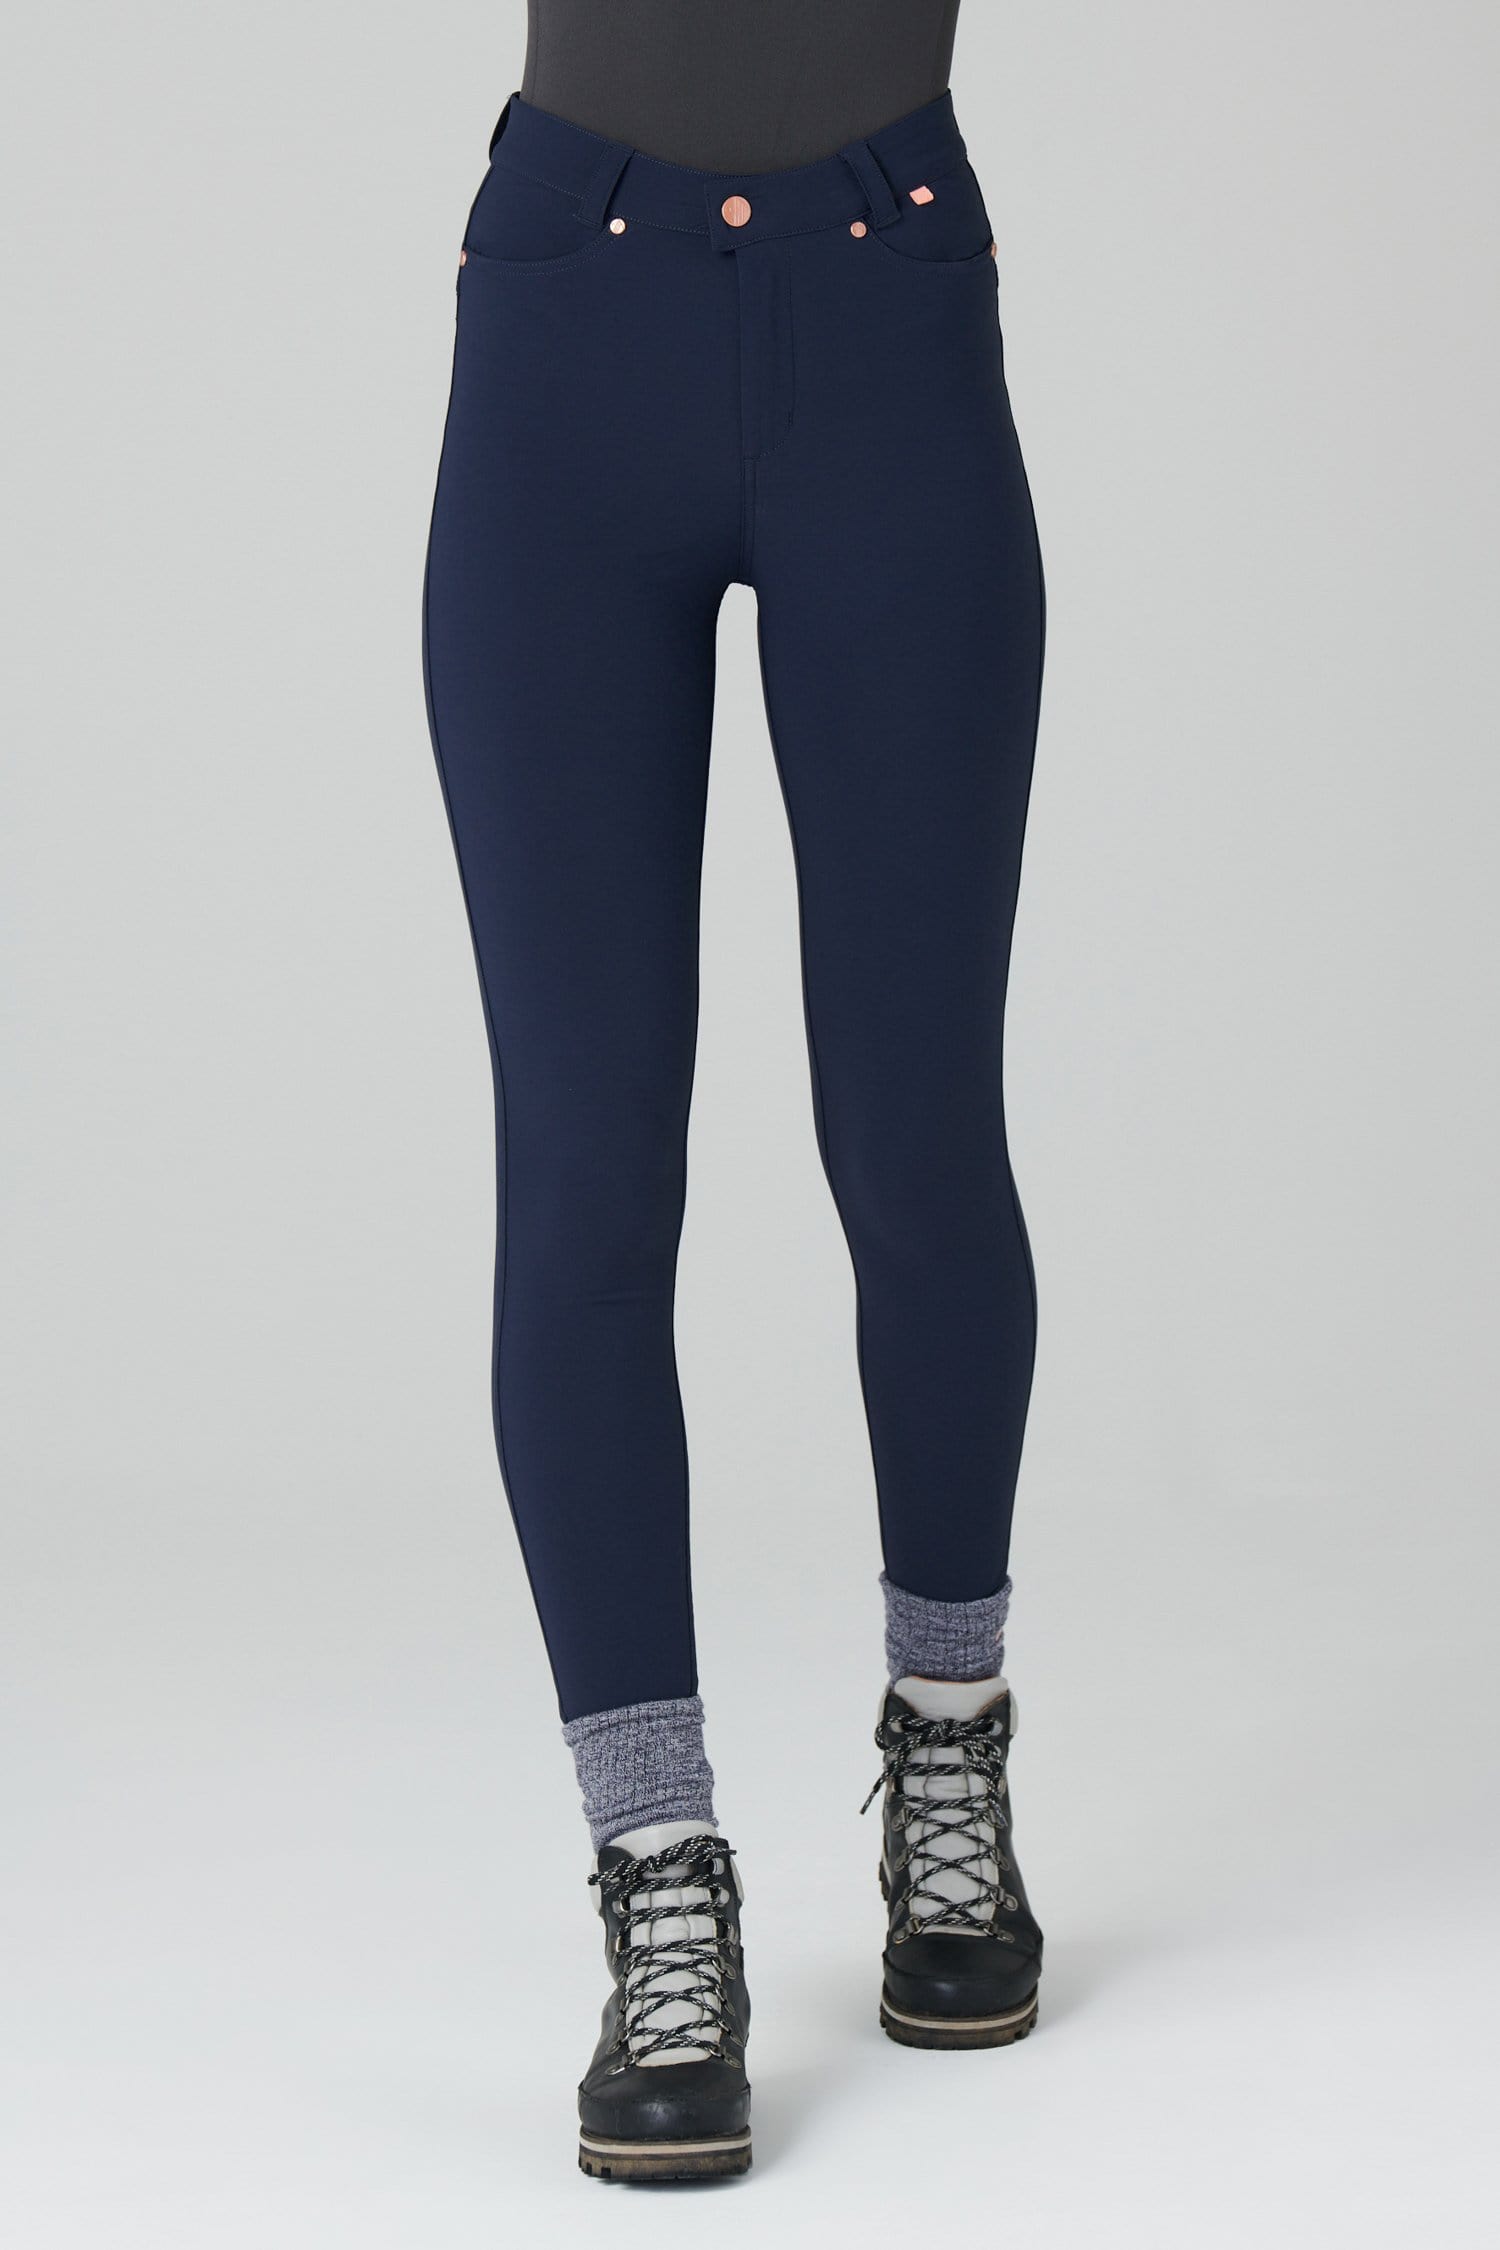 Max Stretch Skinny Outdoor Trousers - Deep Navy - 34p / Uk16 - Womens - Acai Outdoorwear